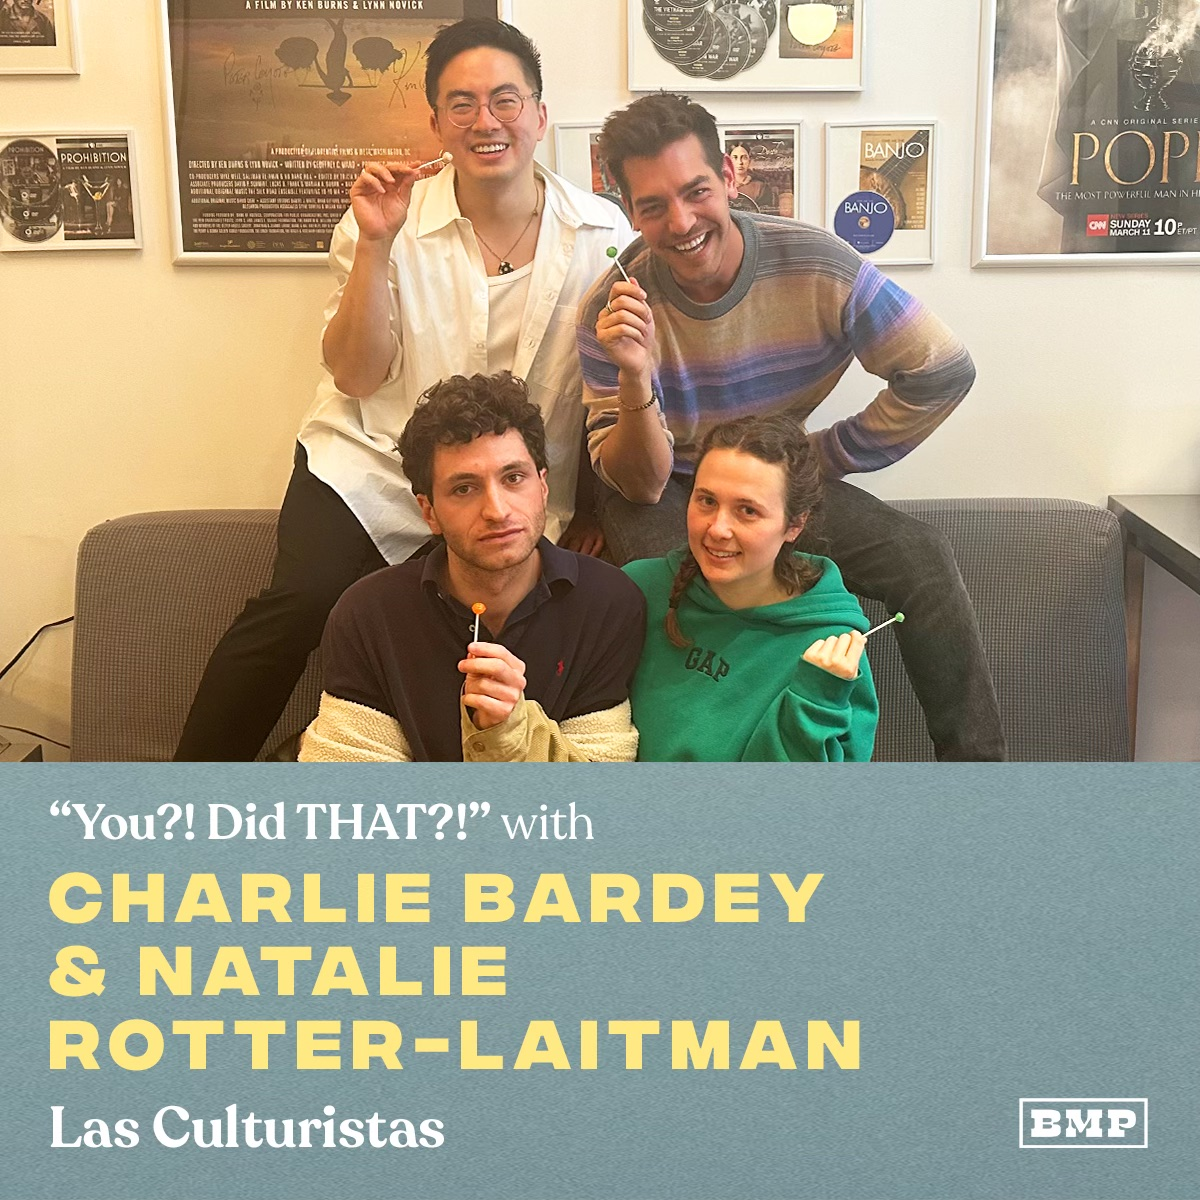 ”You?! Did THAT?!” (w/ Charlie Bardey & Natalie Rotter-Laitman)